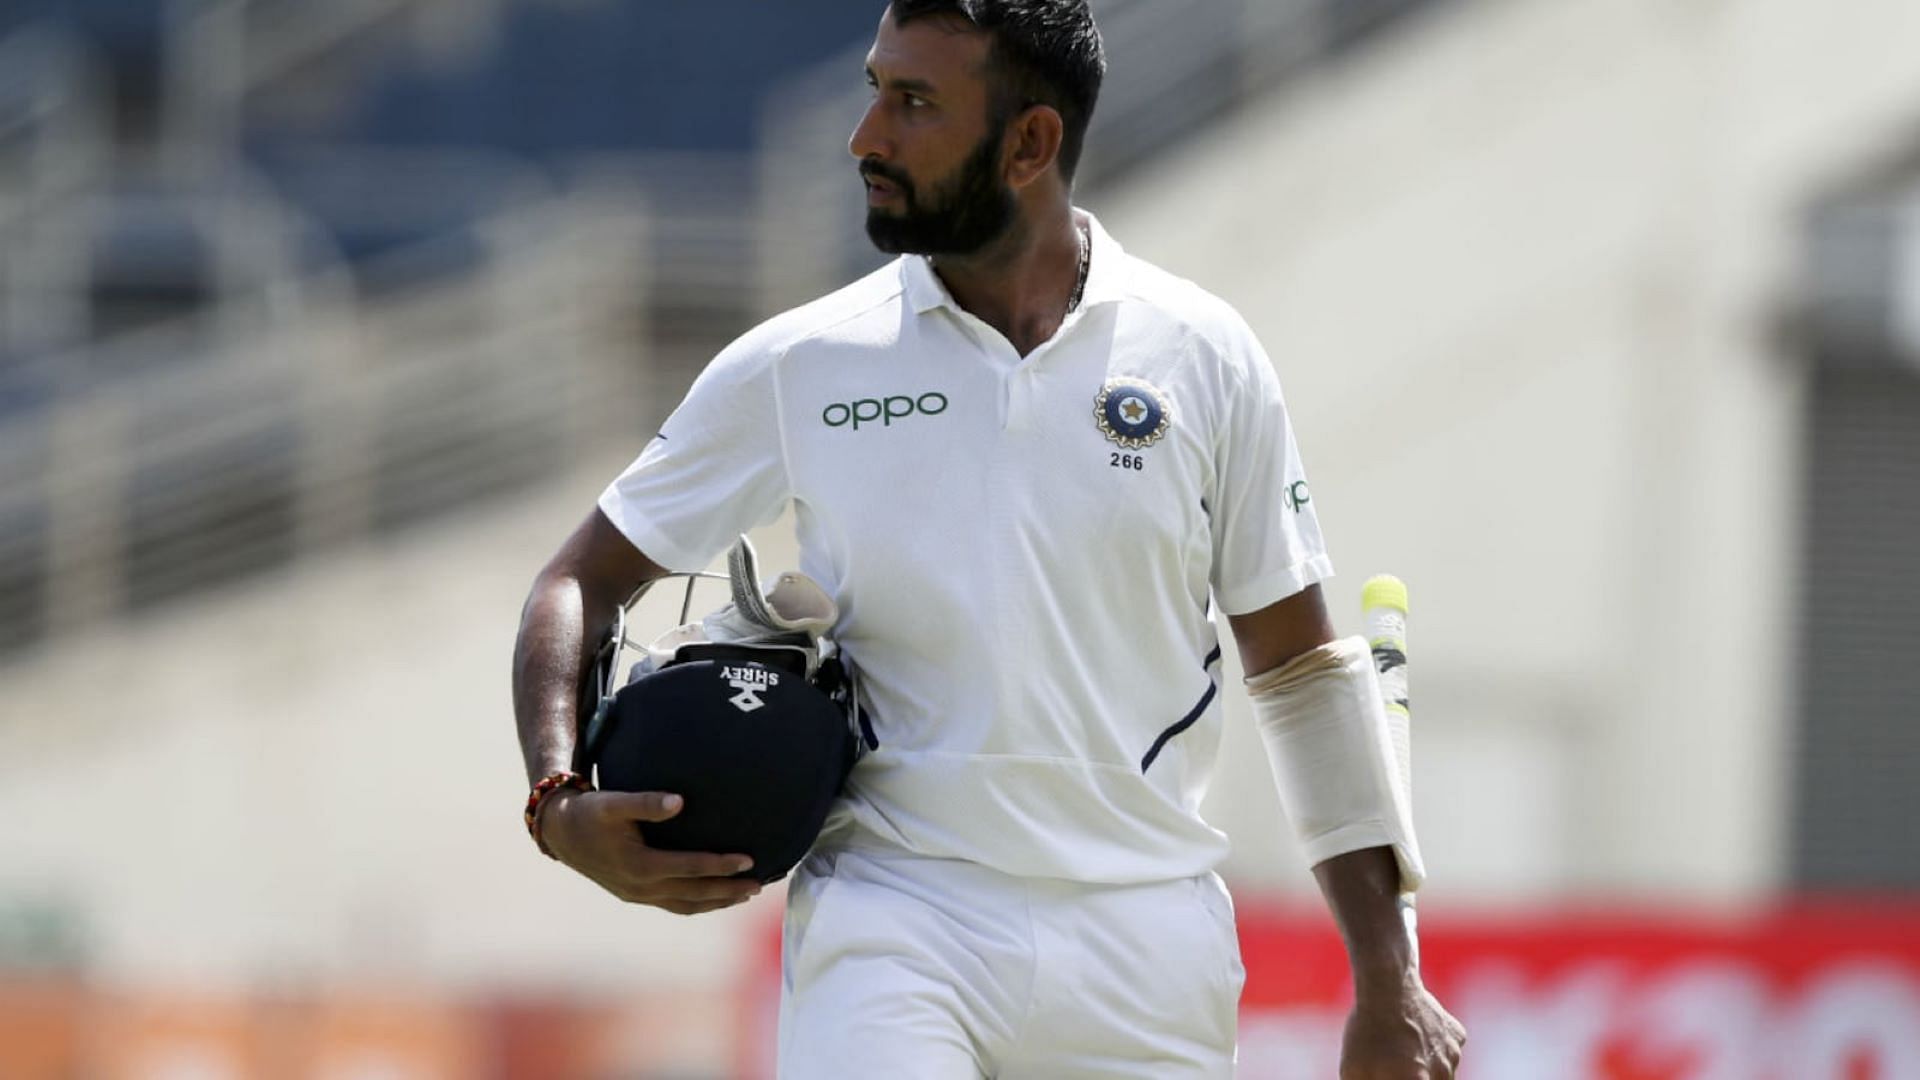 Pujara endured a tough outing in the WTC final